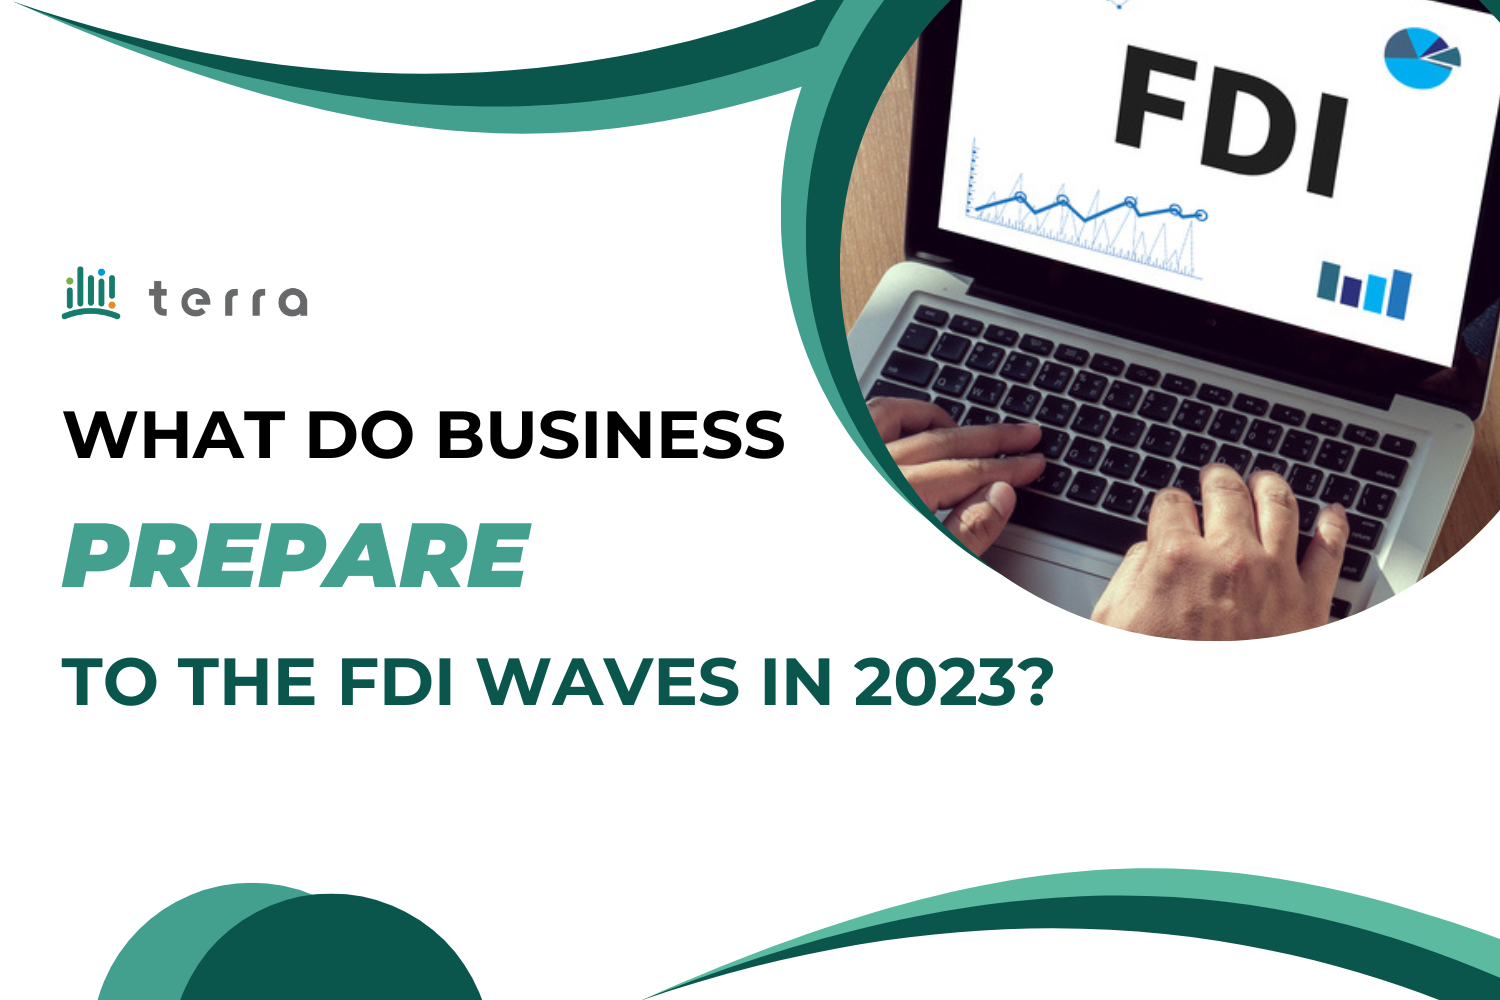 What do business prepare to the FDI waves in 2023 ?